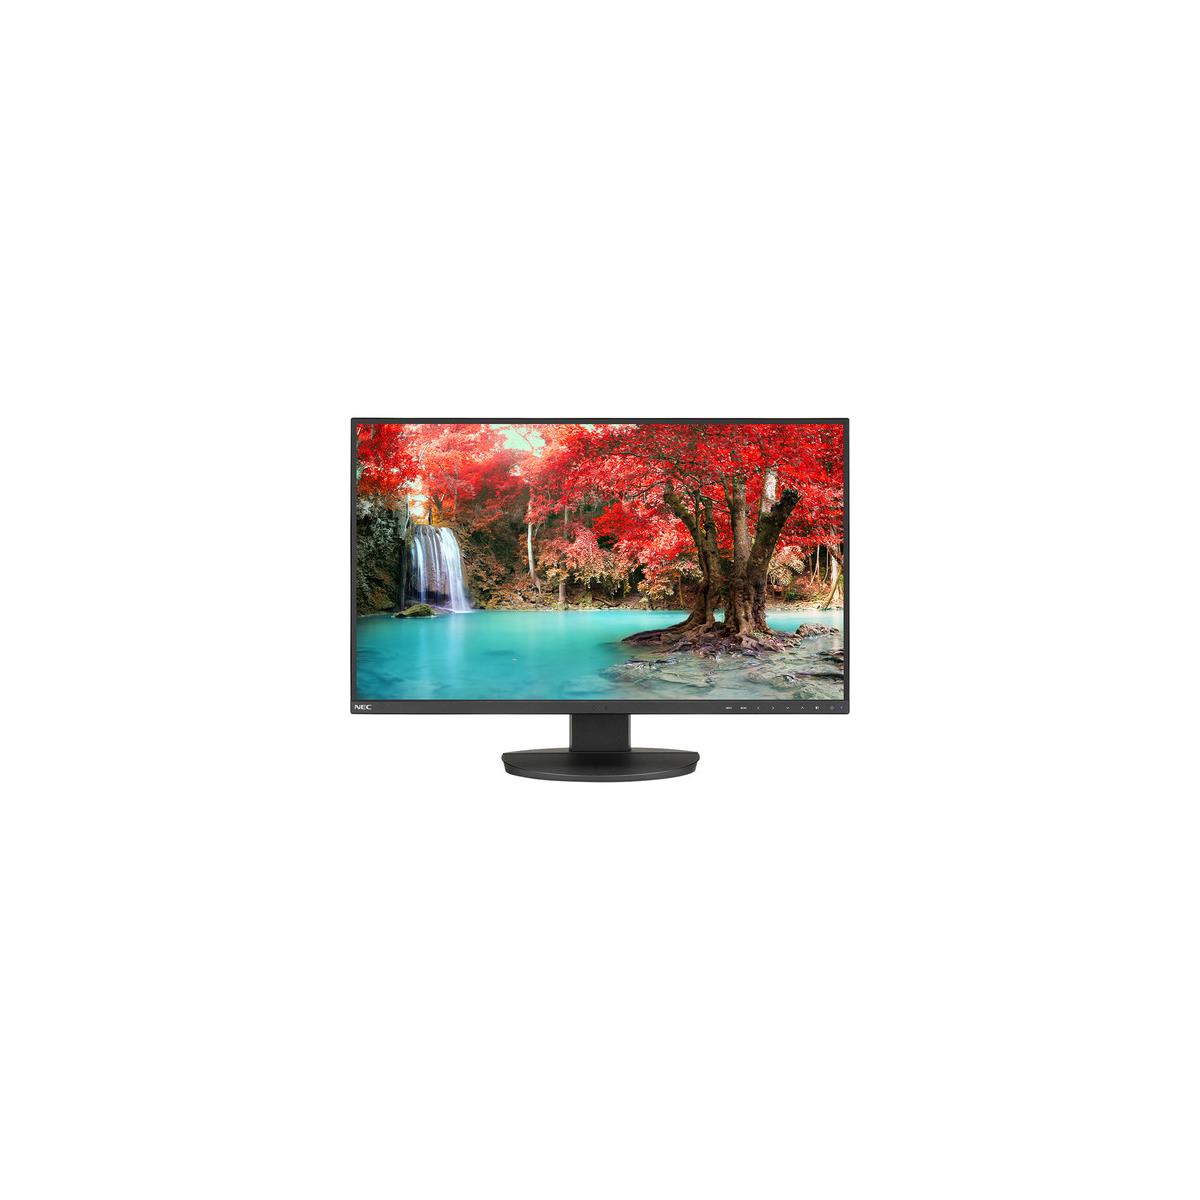 

NEC EA271Q 27" WQHD PLS LED Monitor, Integrated Speakers, SpectraViewII Software